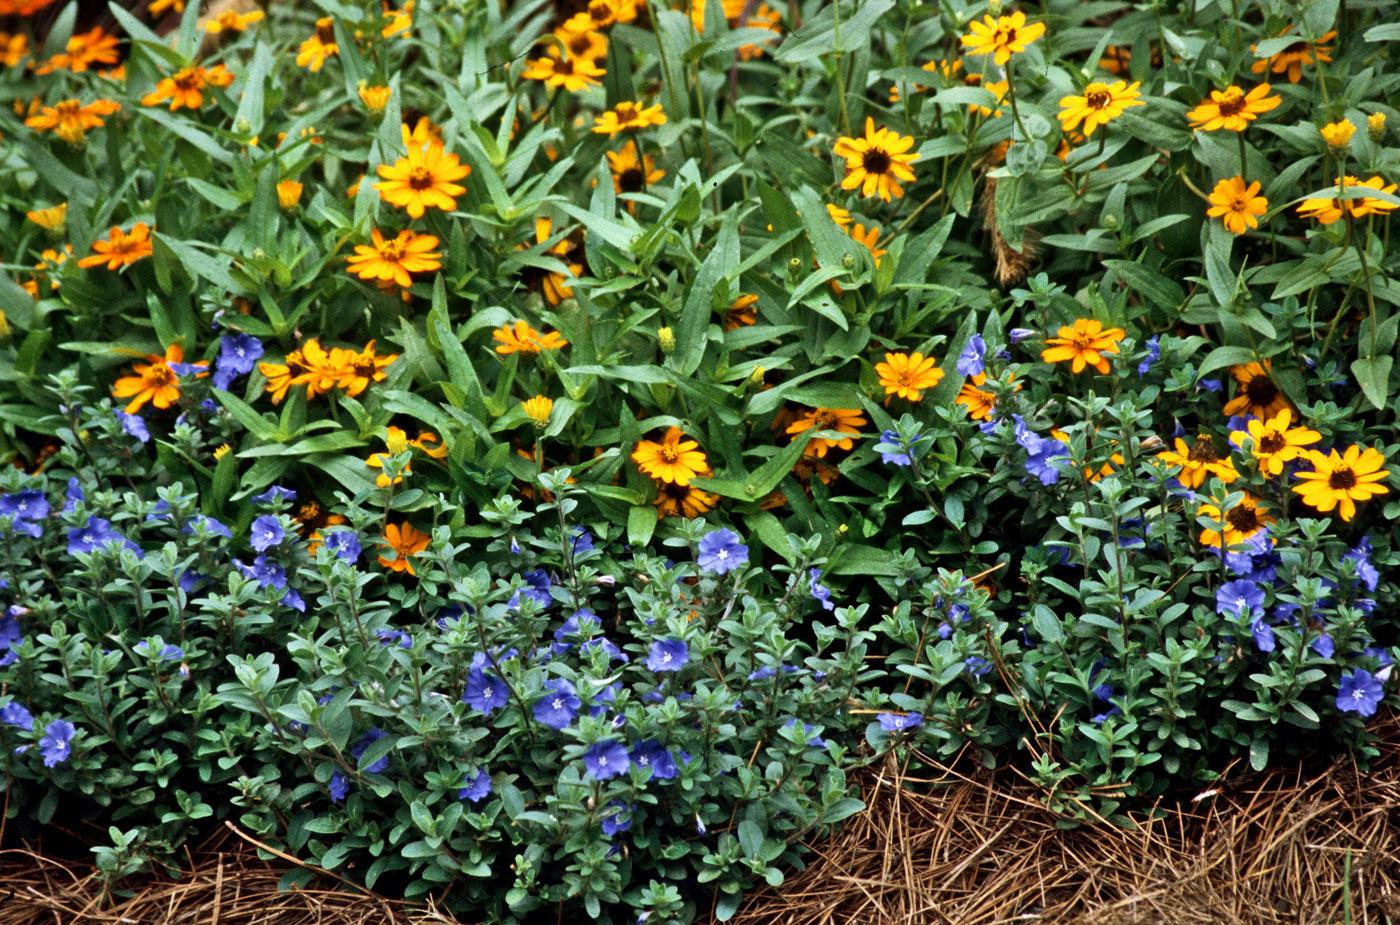 Blue Daze, a selection of Evolvulus glomeratus, can provide blue color throughout the hottest summer until the first frost. They work well planted toward the front of the border in this garden and used with other tough-as-nails flowers like the Profusion Fire zinnia. (Photo by Norman Winter)